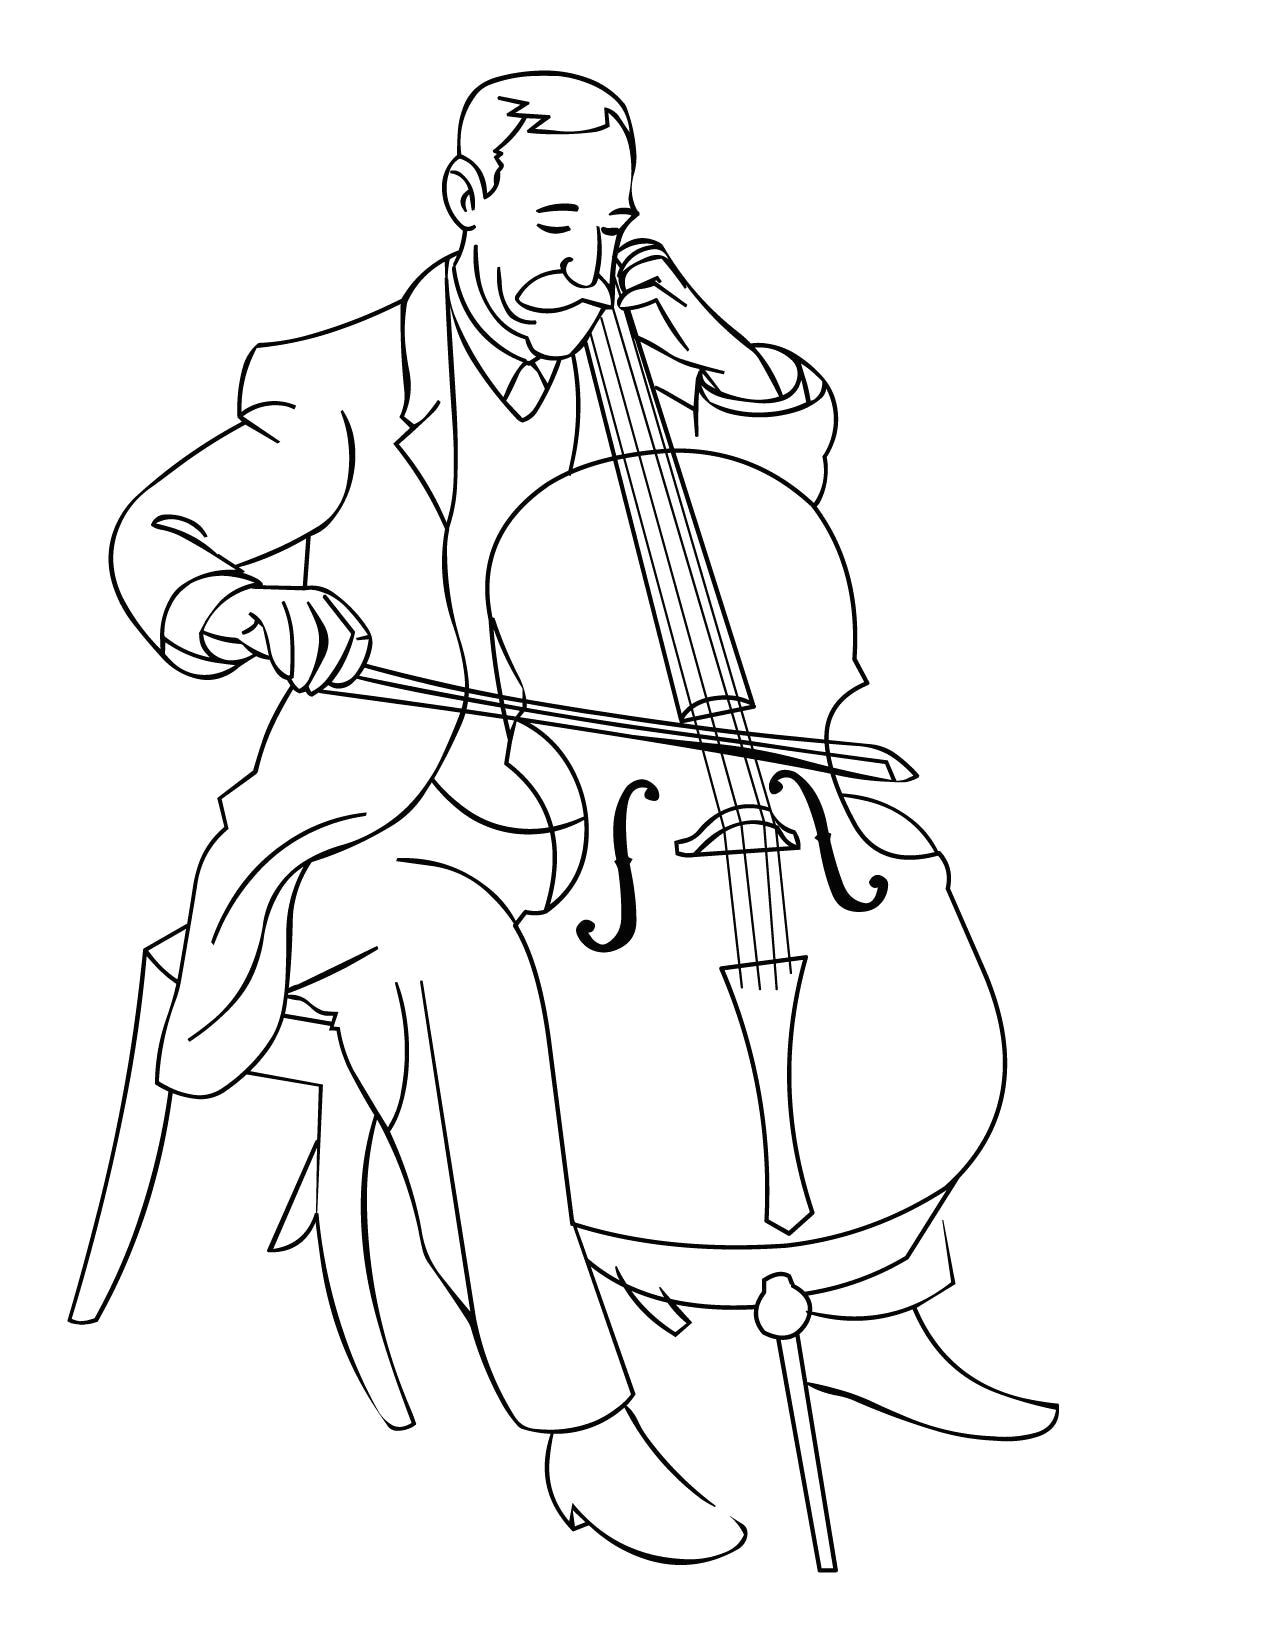 Easy Drawings with Color Easy to Draw Instruments Home Coloring Pages Best Color Sheet 0d